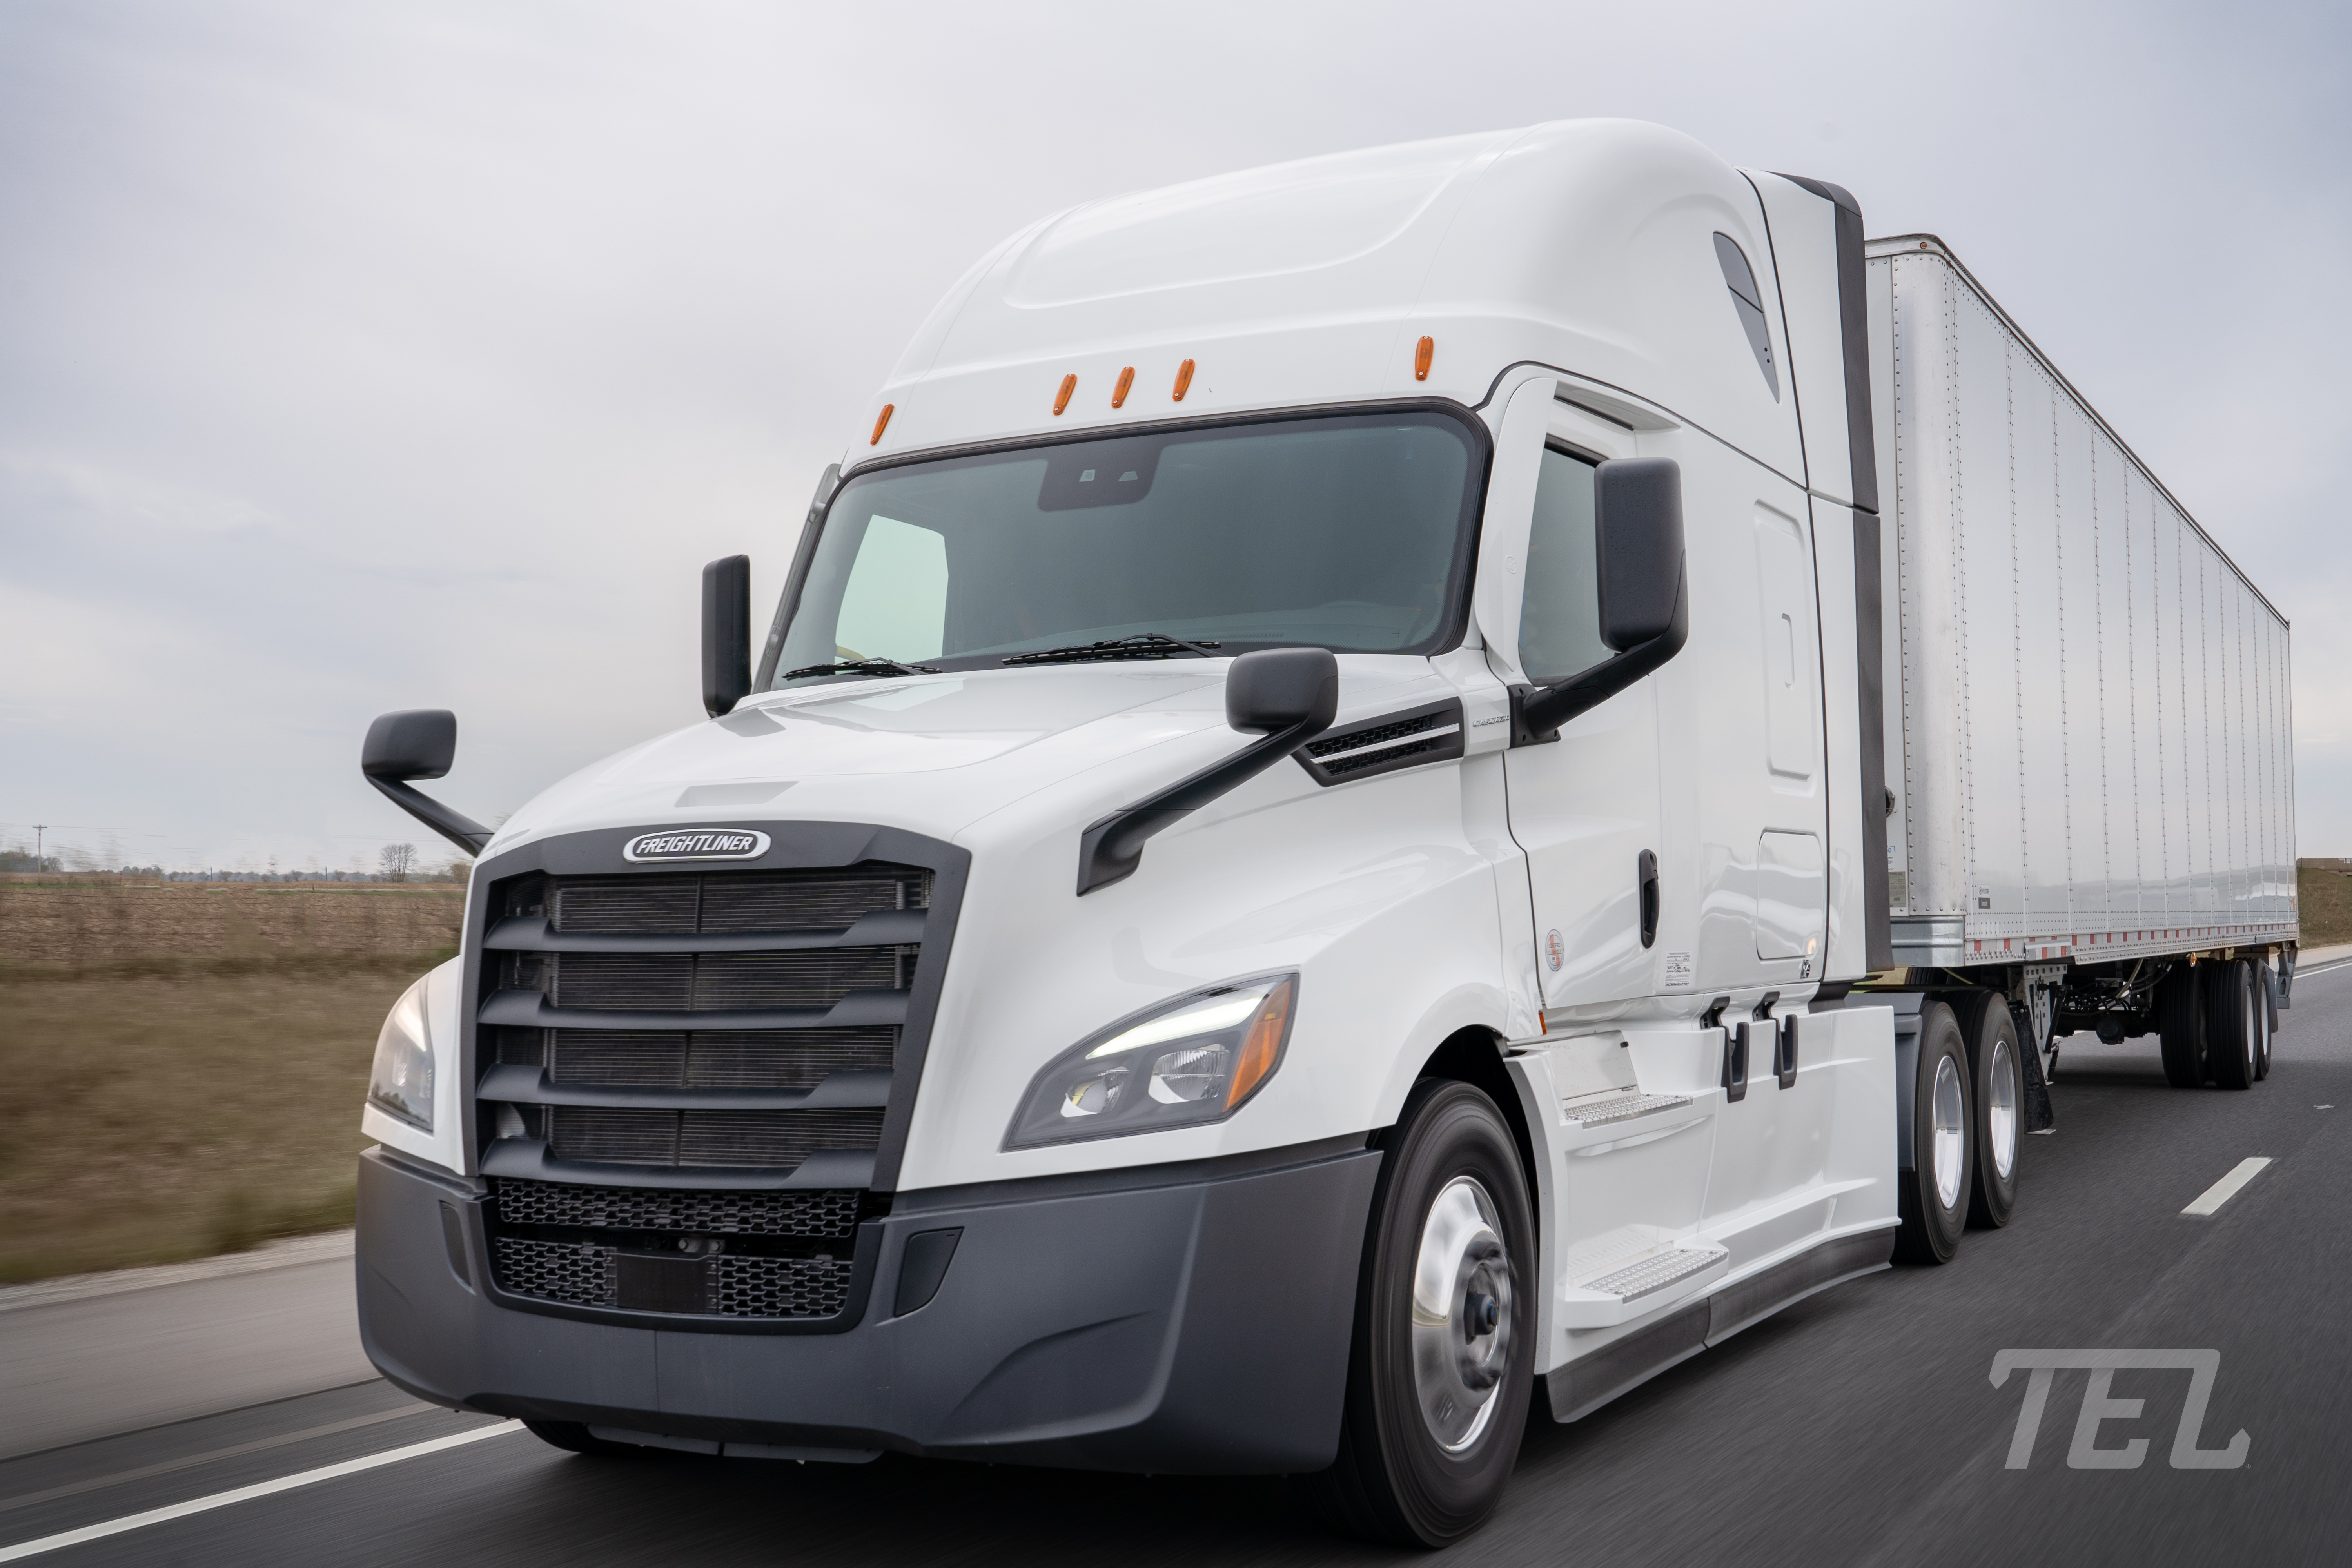 Transport Enterprise Leasing is expanding into the Southwestern United States